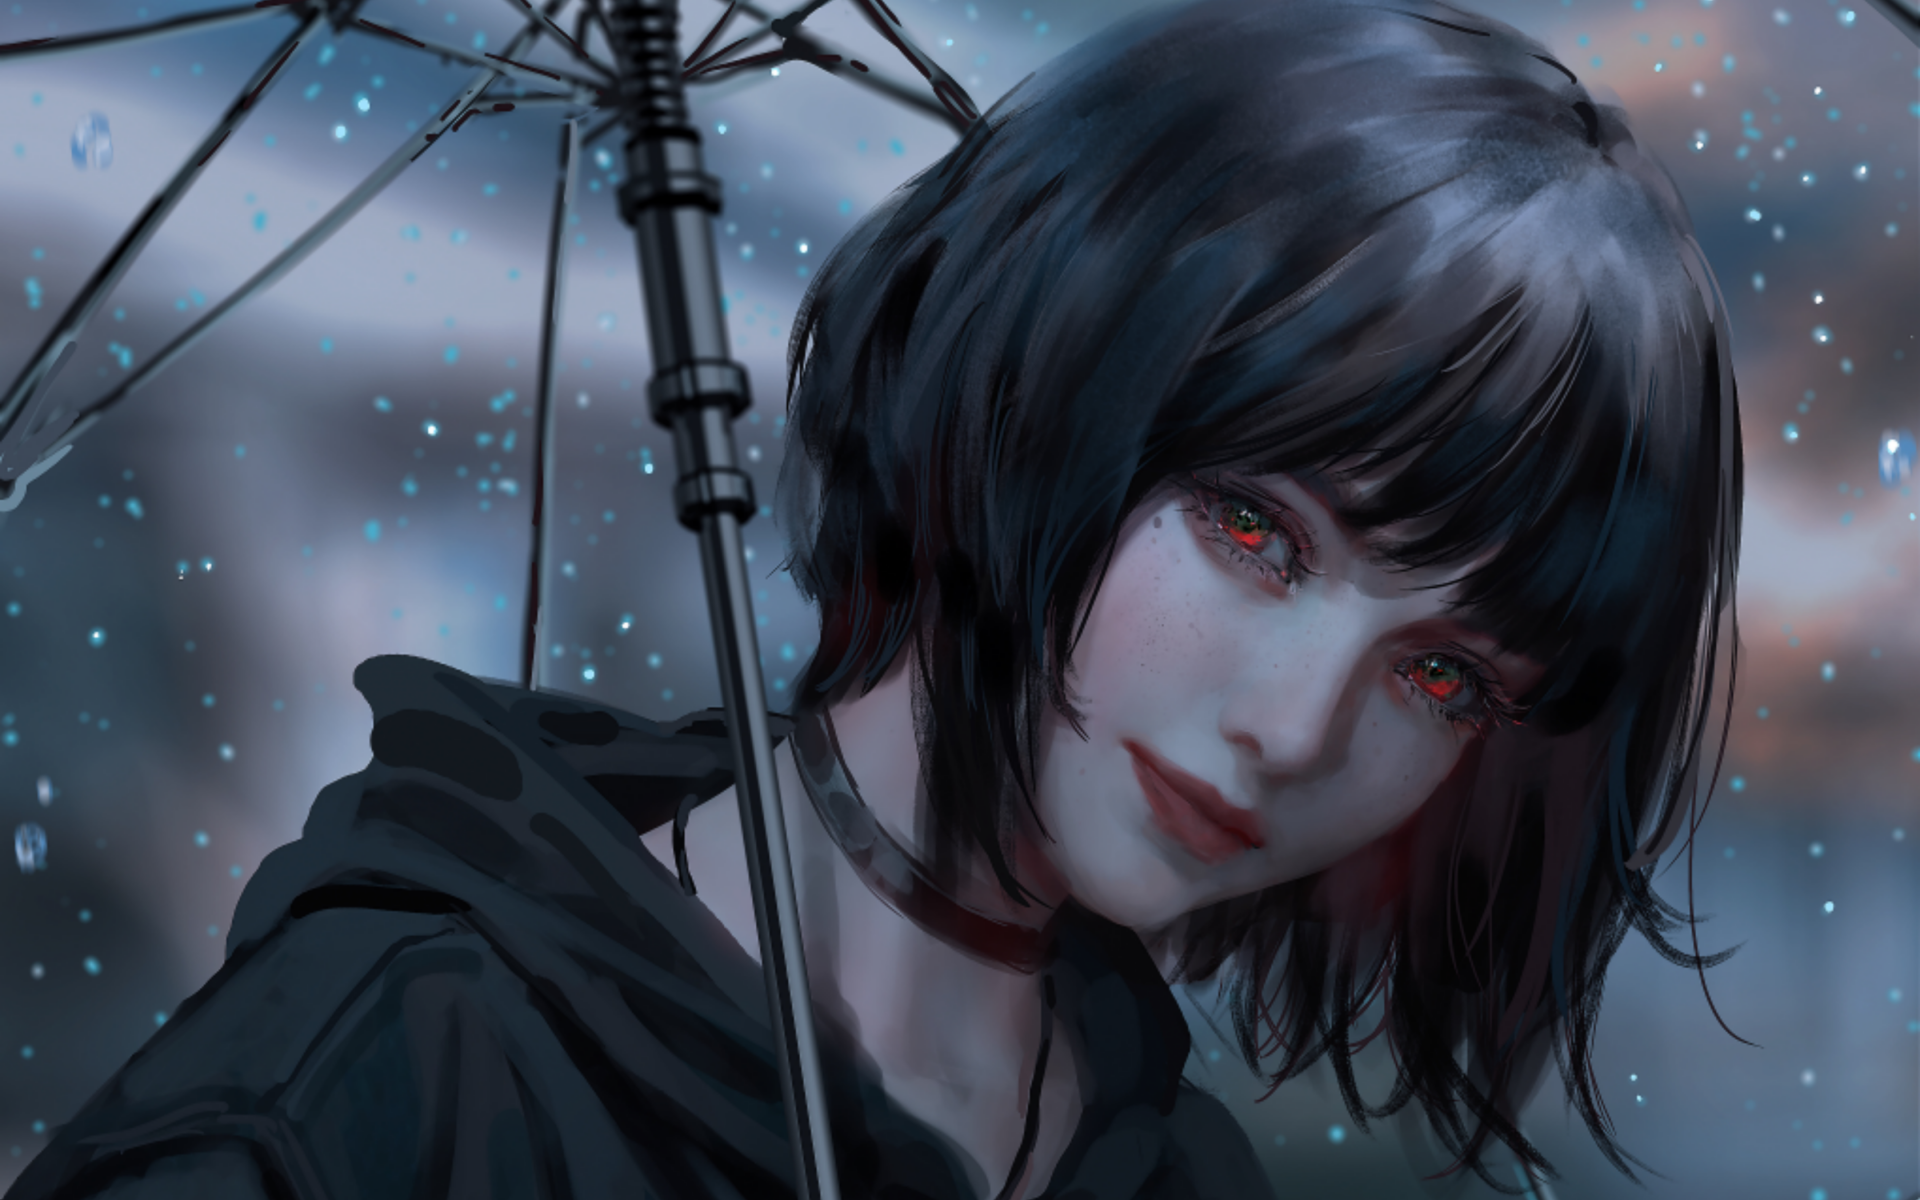 Girl with black hair by krzychumen on DeviantArt